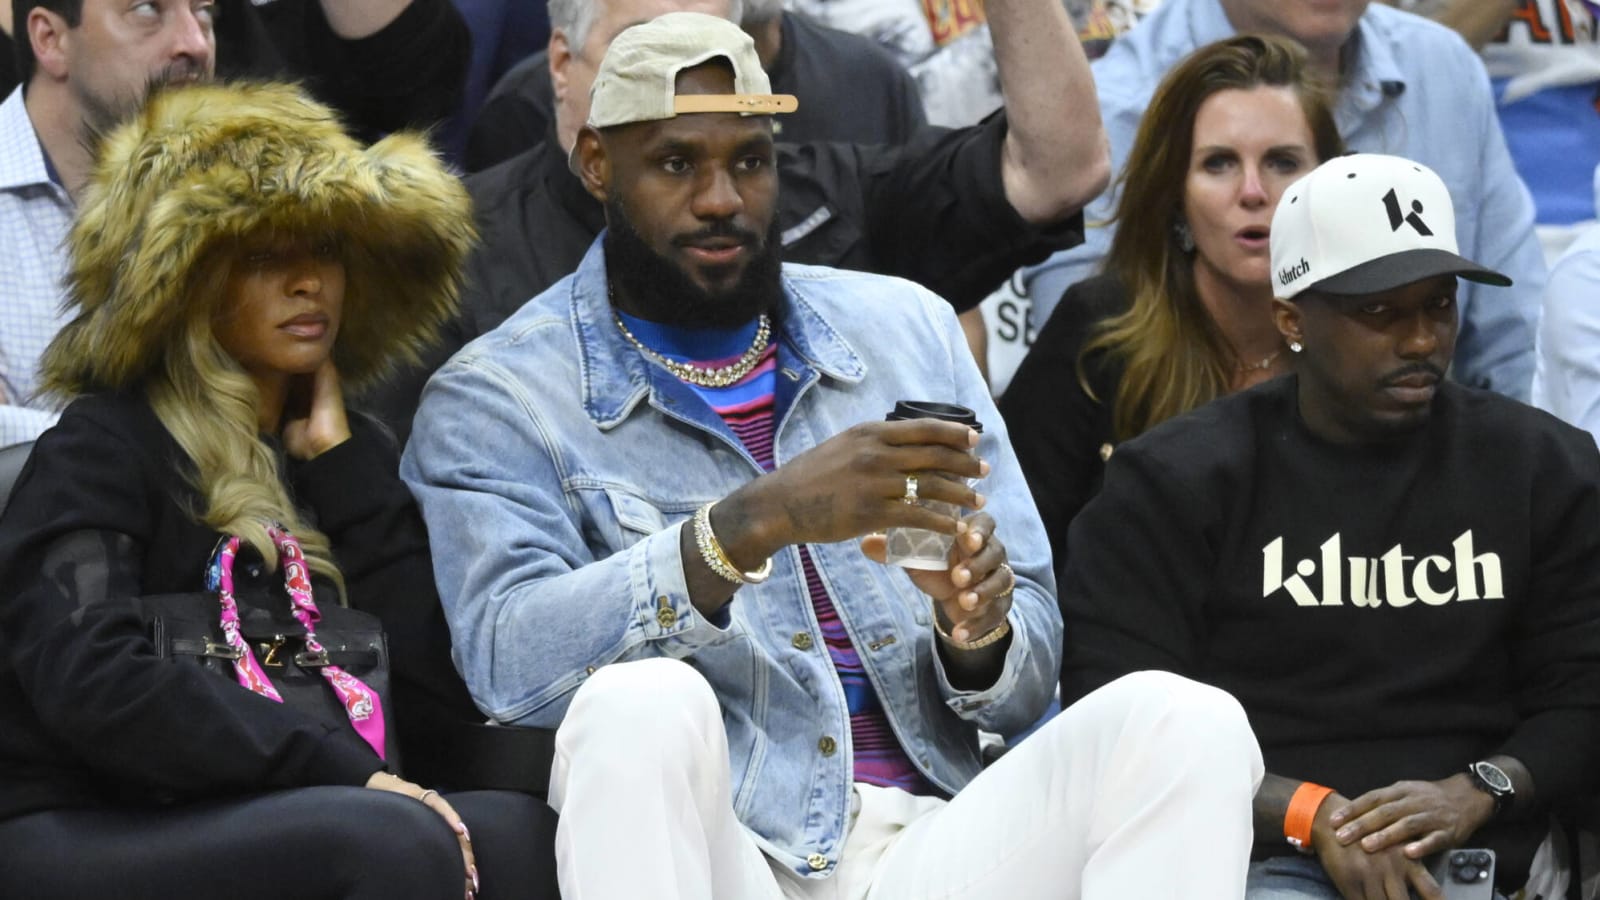 Cleveland Cavaliers: Lakers’ LeBron James Gets Awesome Ovation From Home Fans in Game 4 Appearance Vs. Celtics